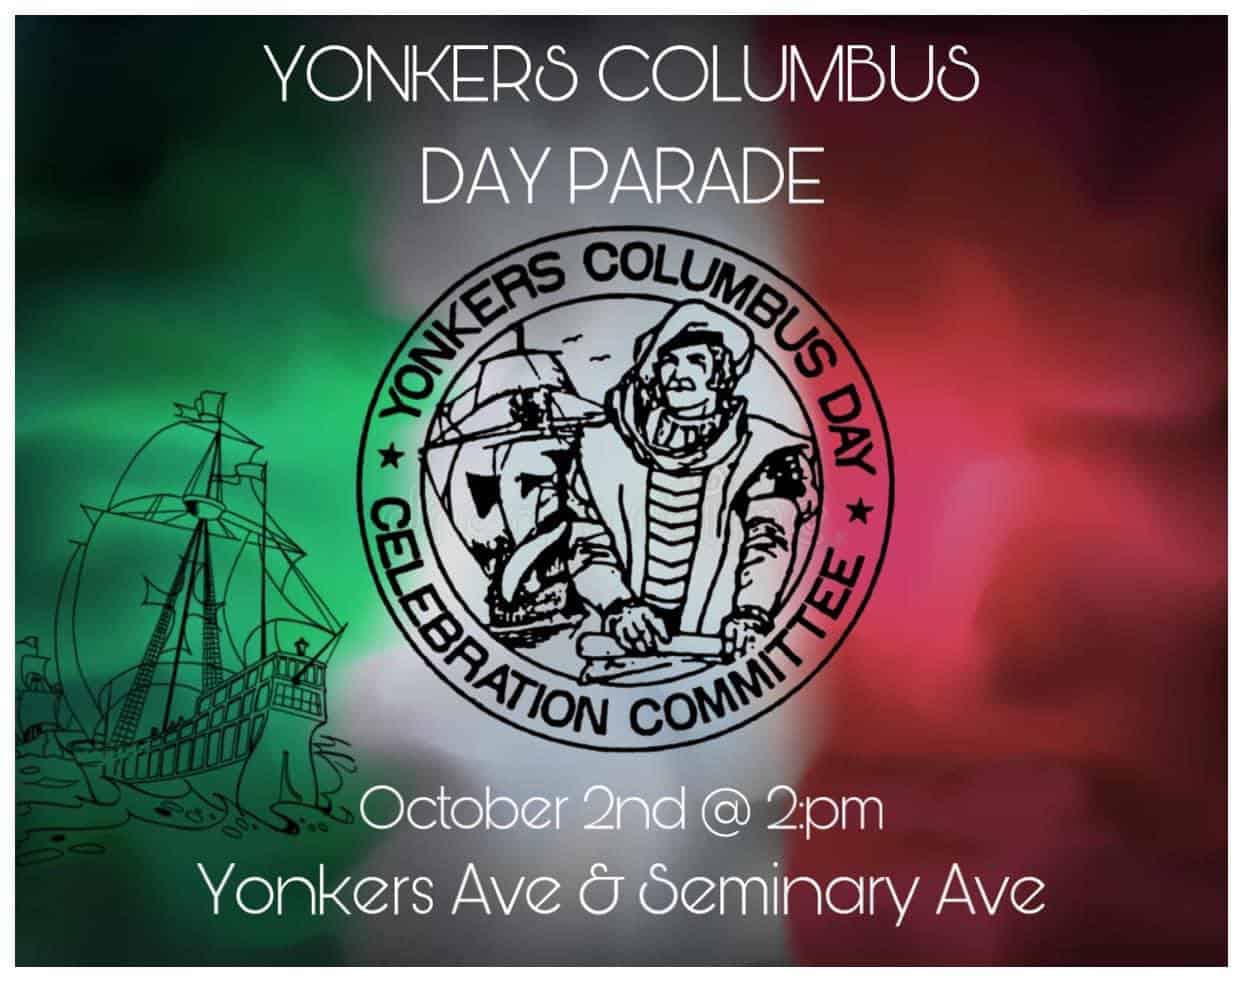 Yonkers Mayor Spano Announces Return of Columbus Day Parade October 2